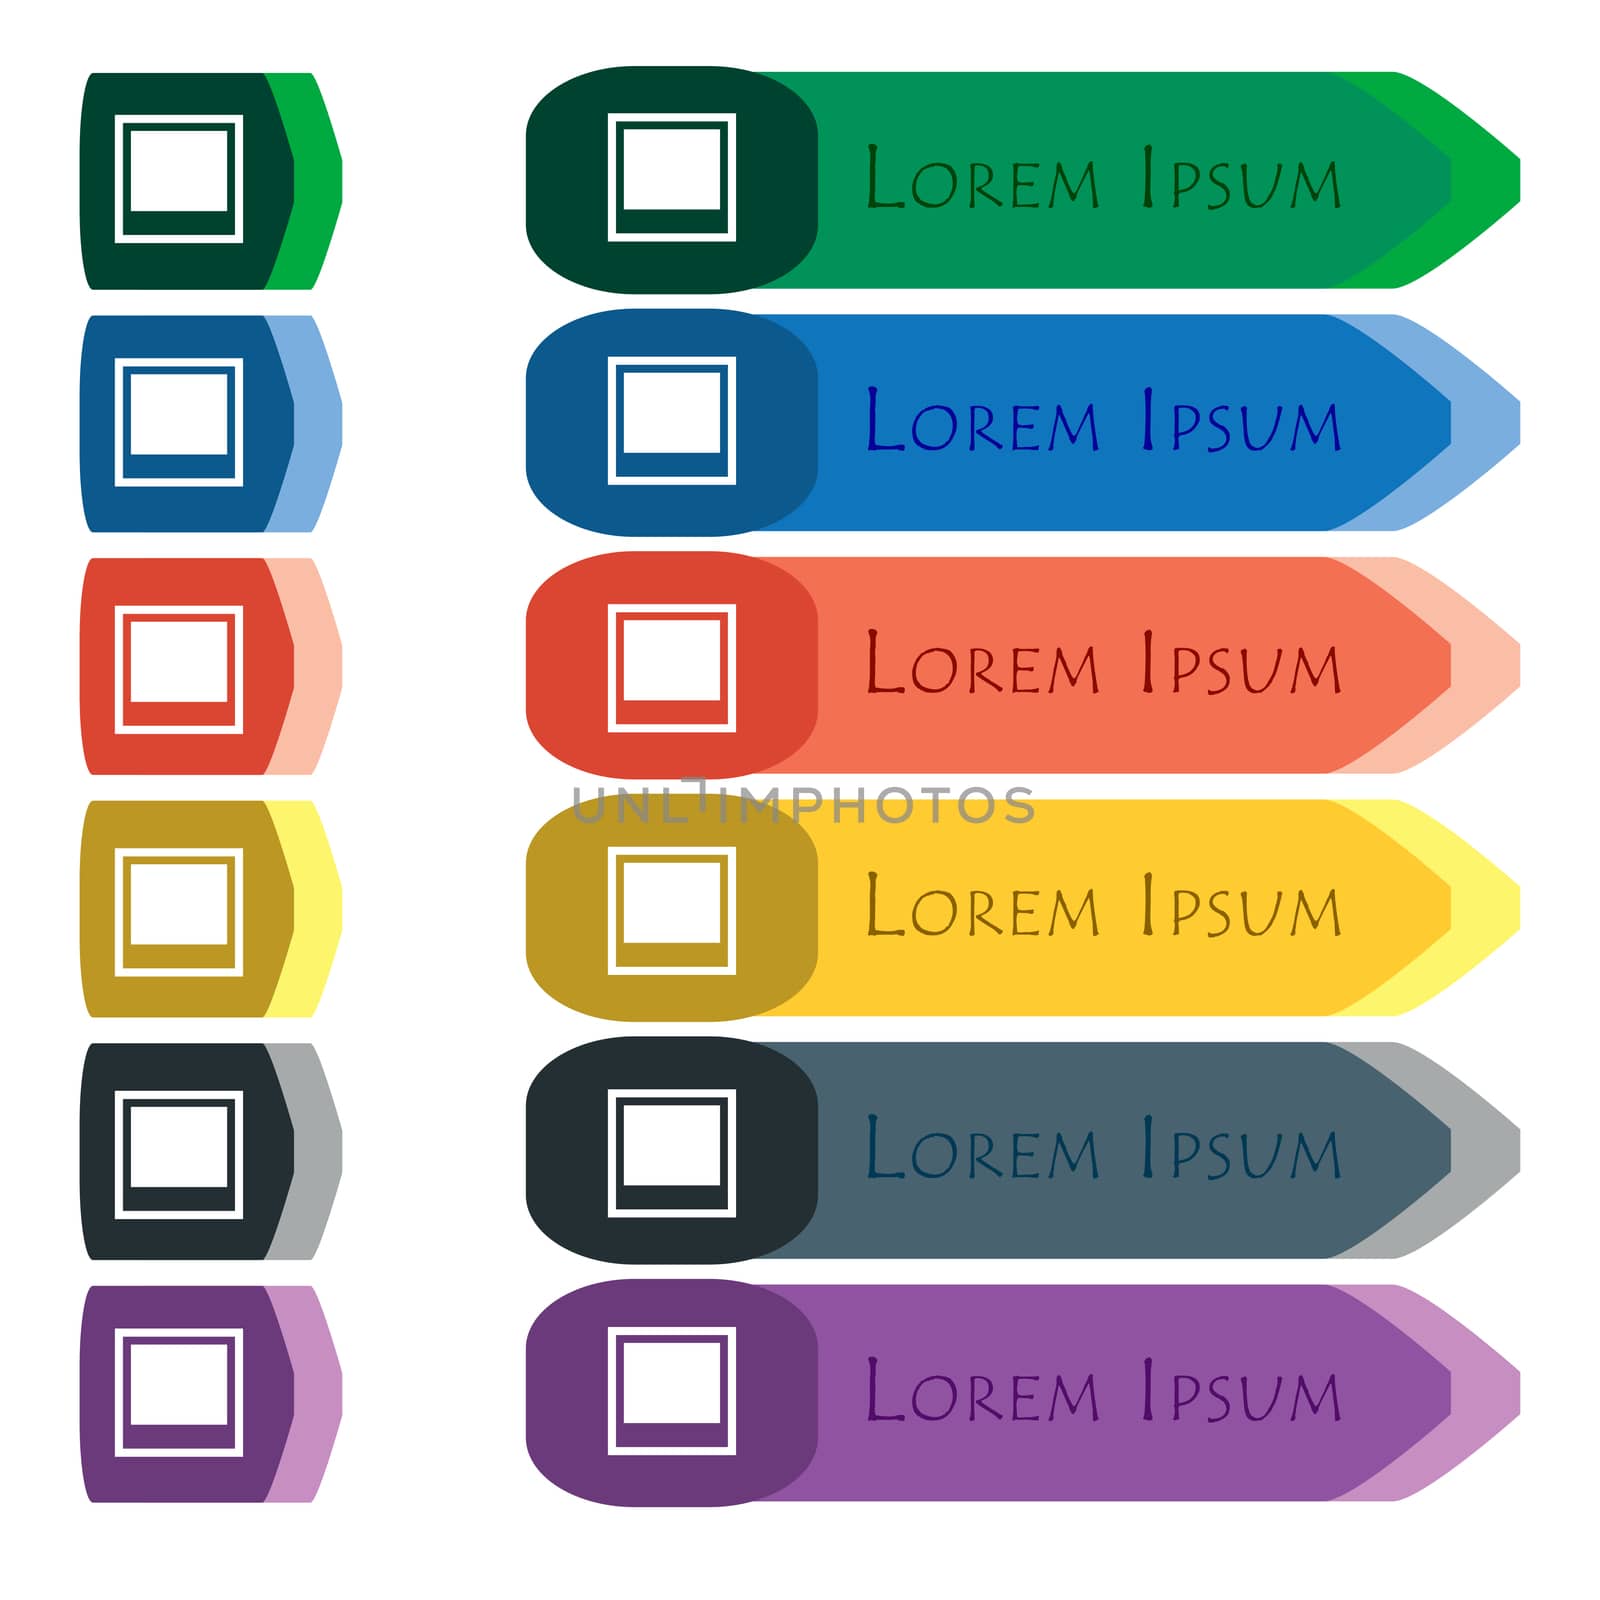 Photo frame template icon sign. Set of colorful, bright long buttons with additional small modules. Flat design. 